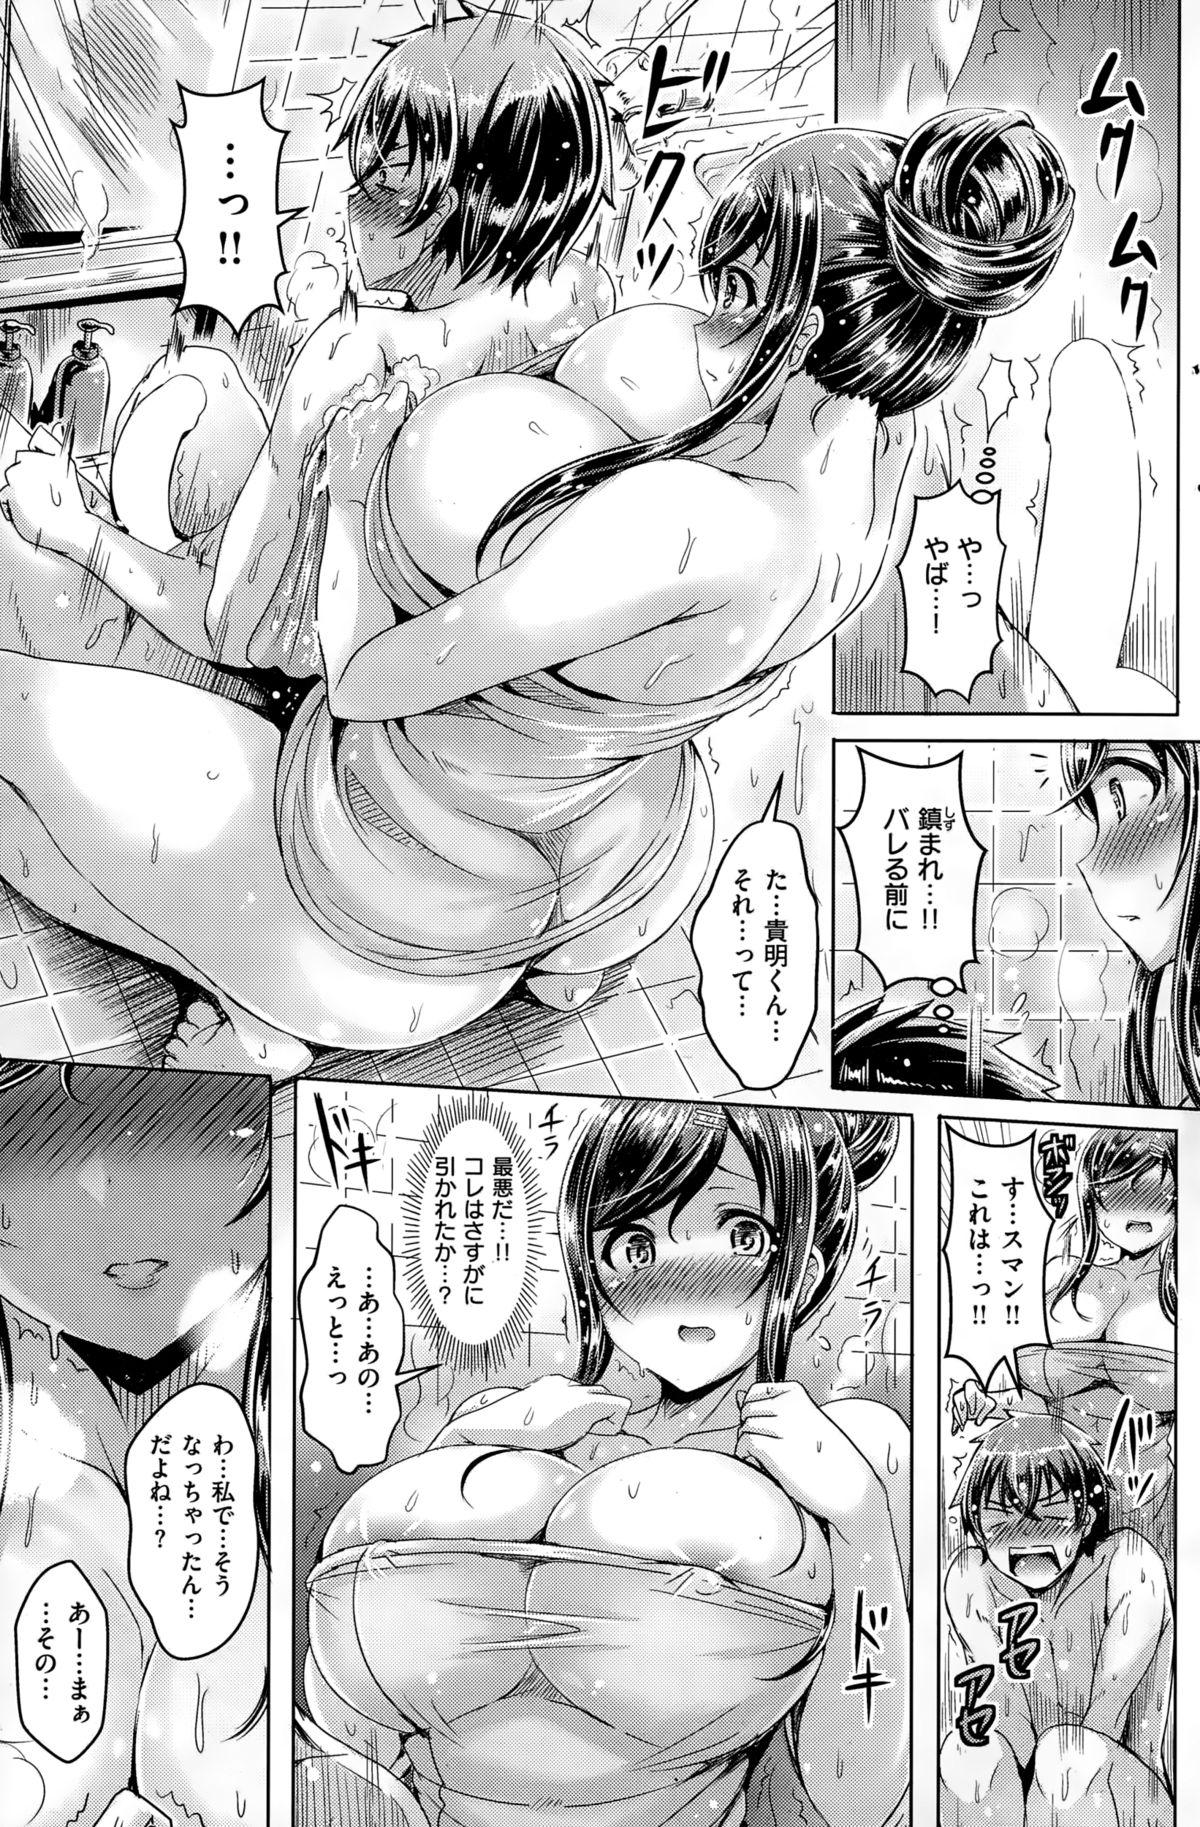 Toys 凸凹LOVERS 8teen - Page 9